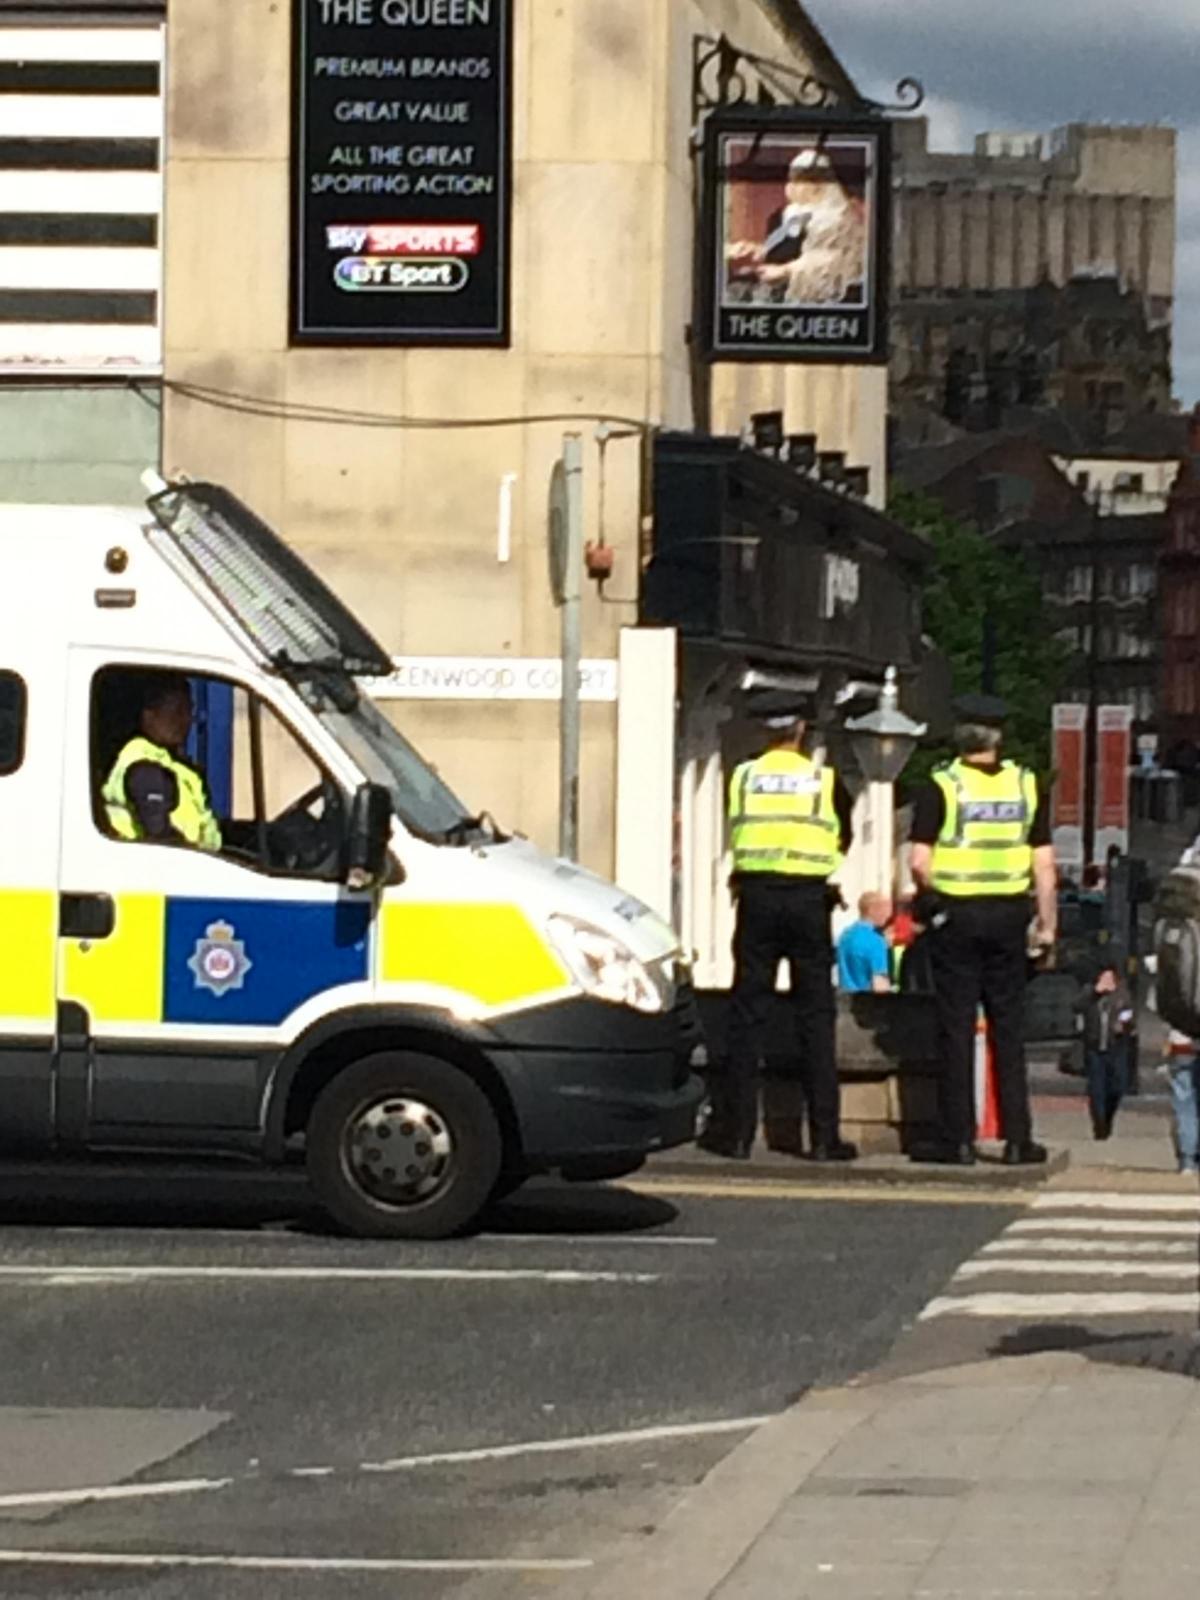 Police gather outside the Queen pub just before 10am today